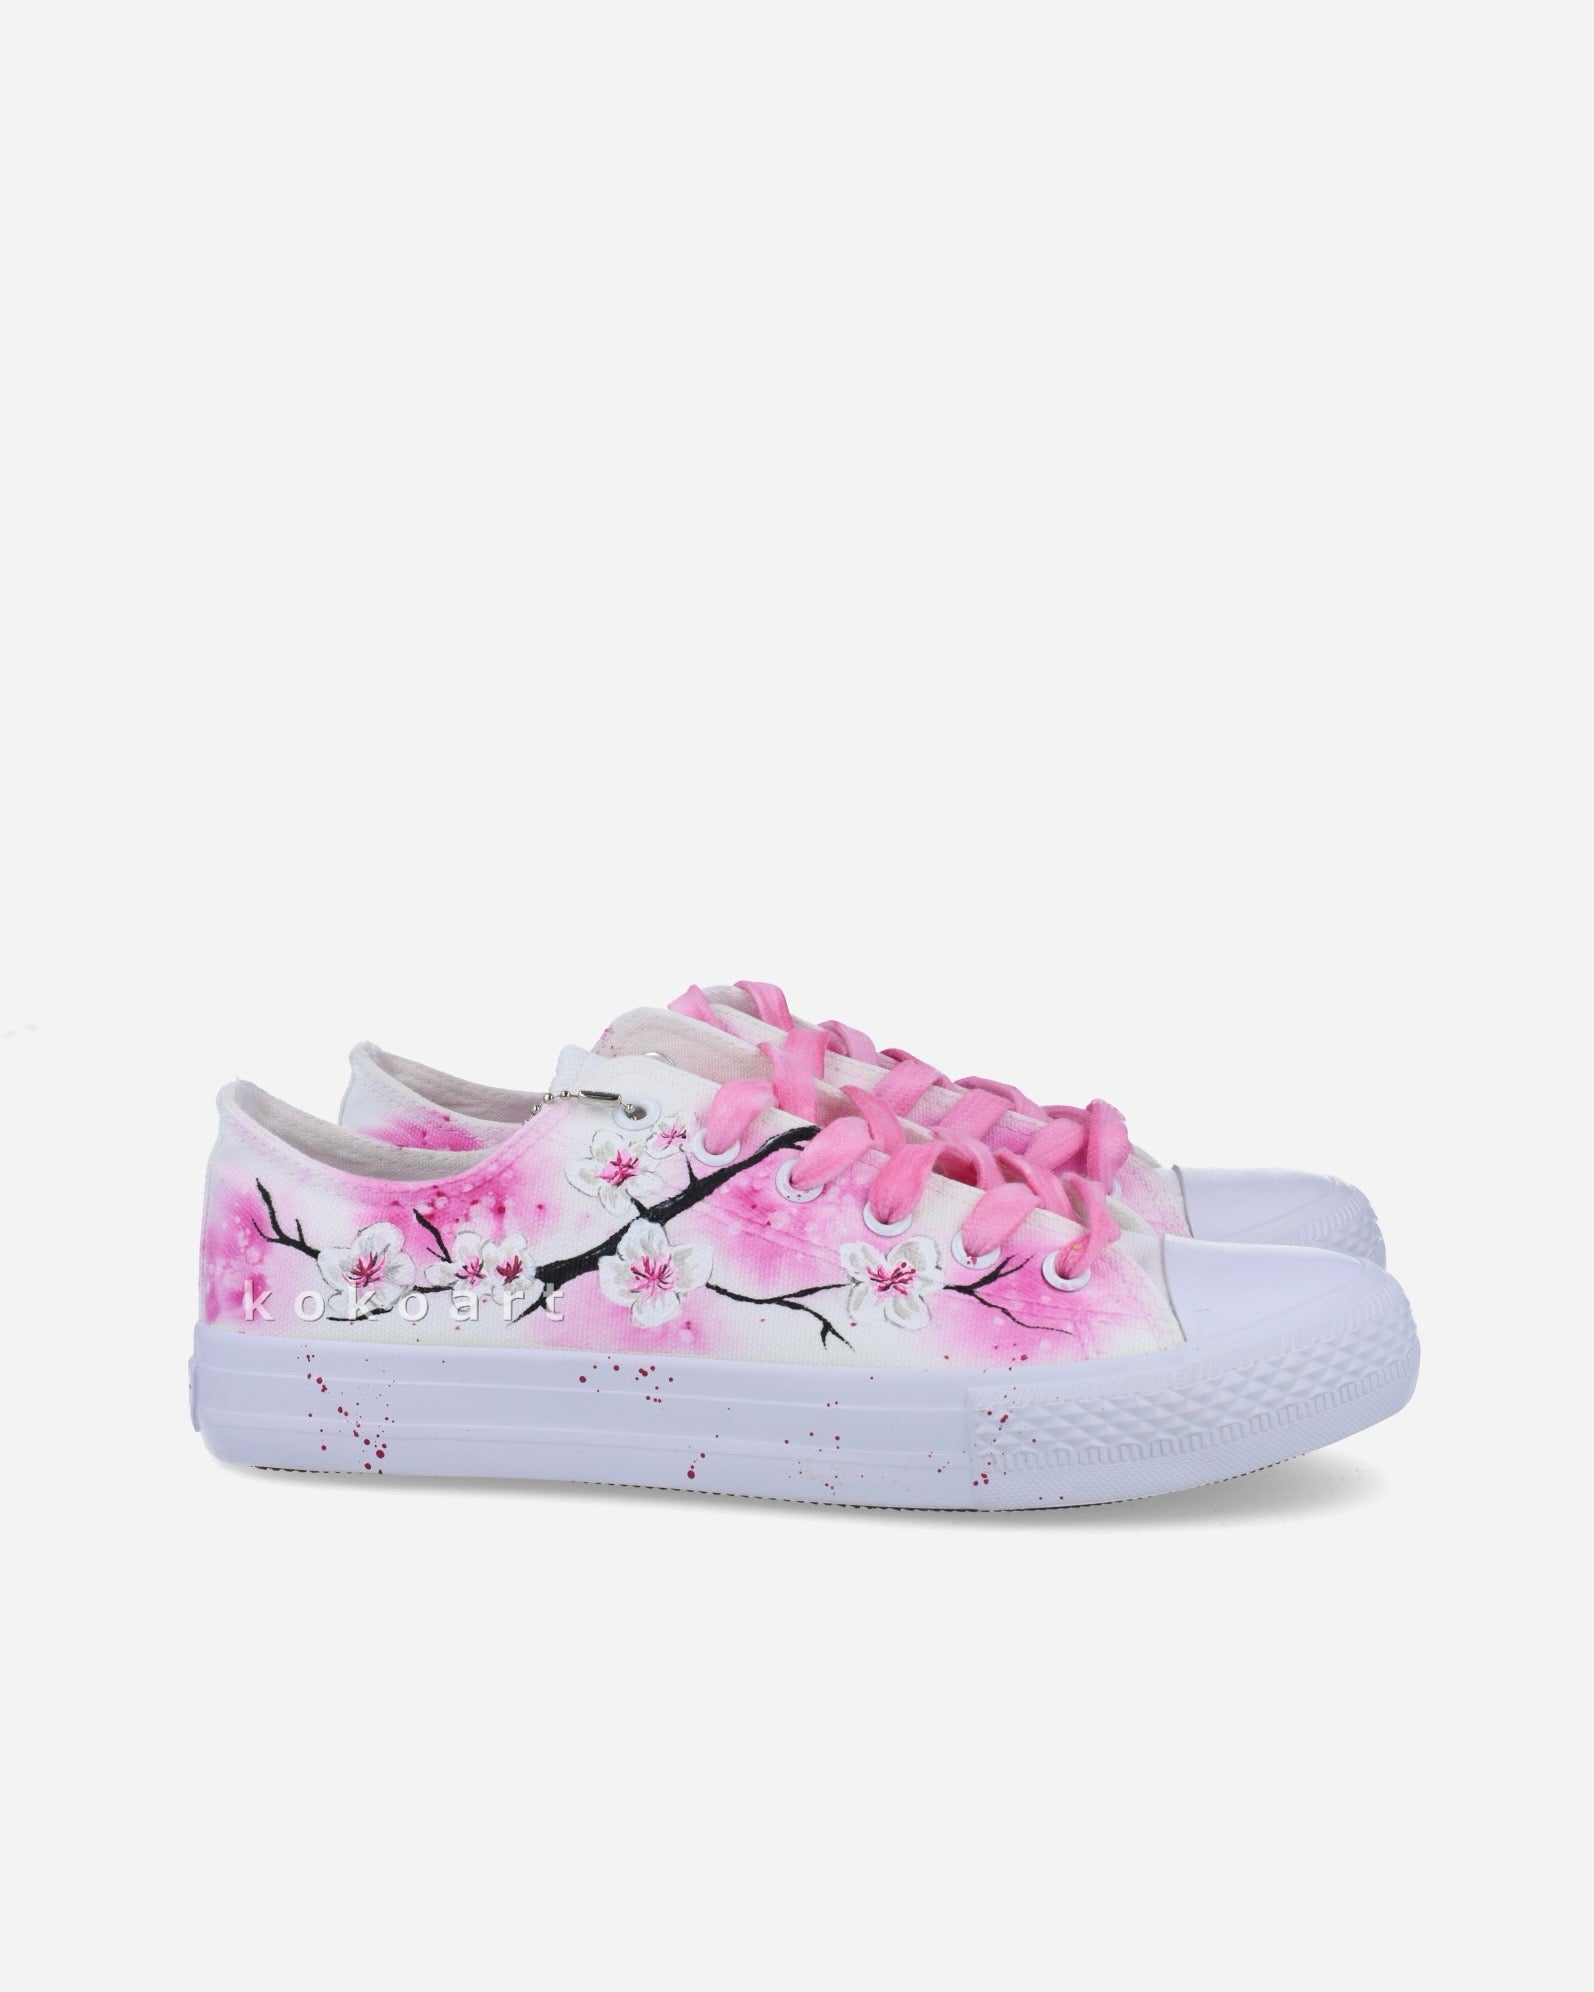 Almond Blossom Hand Painted Shoes